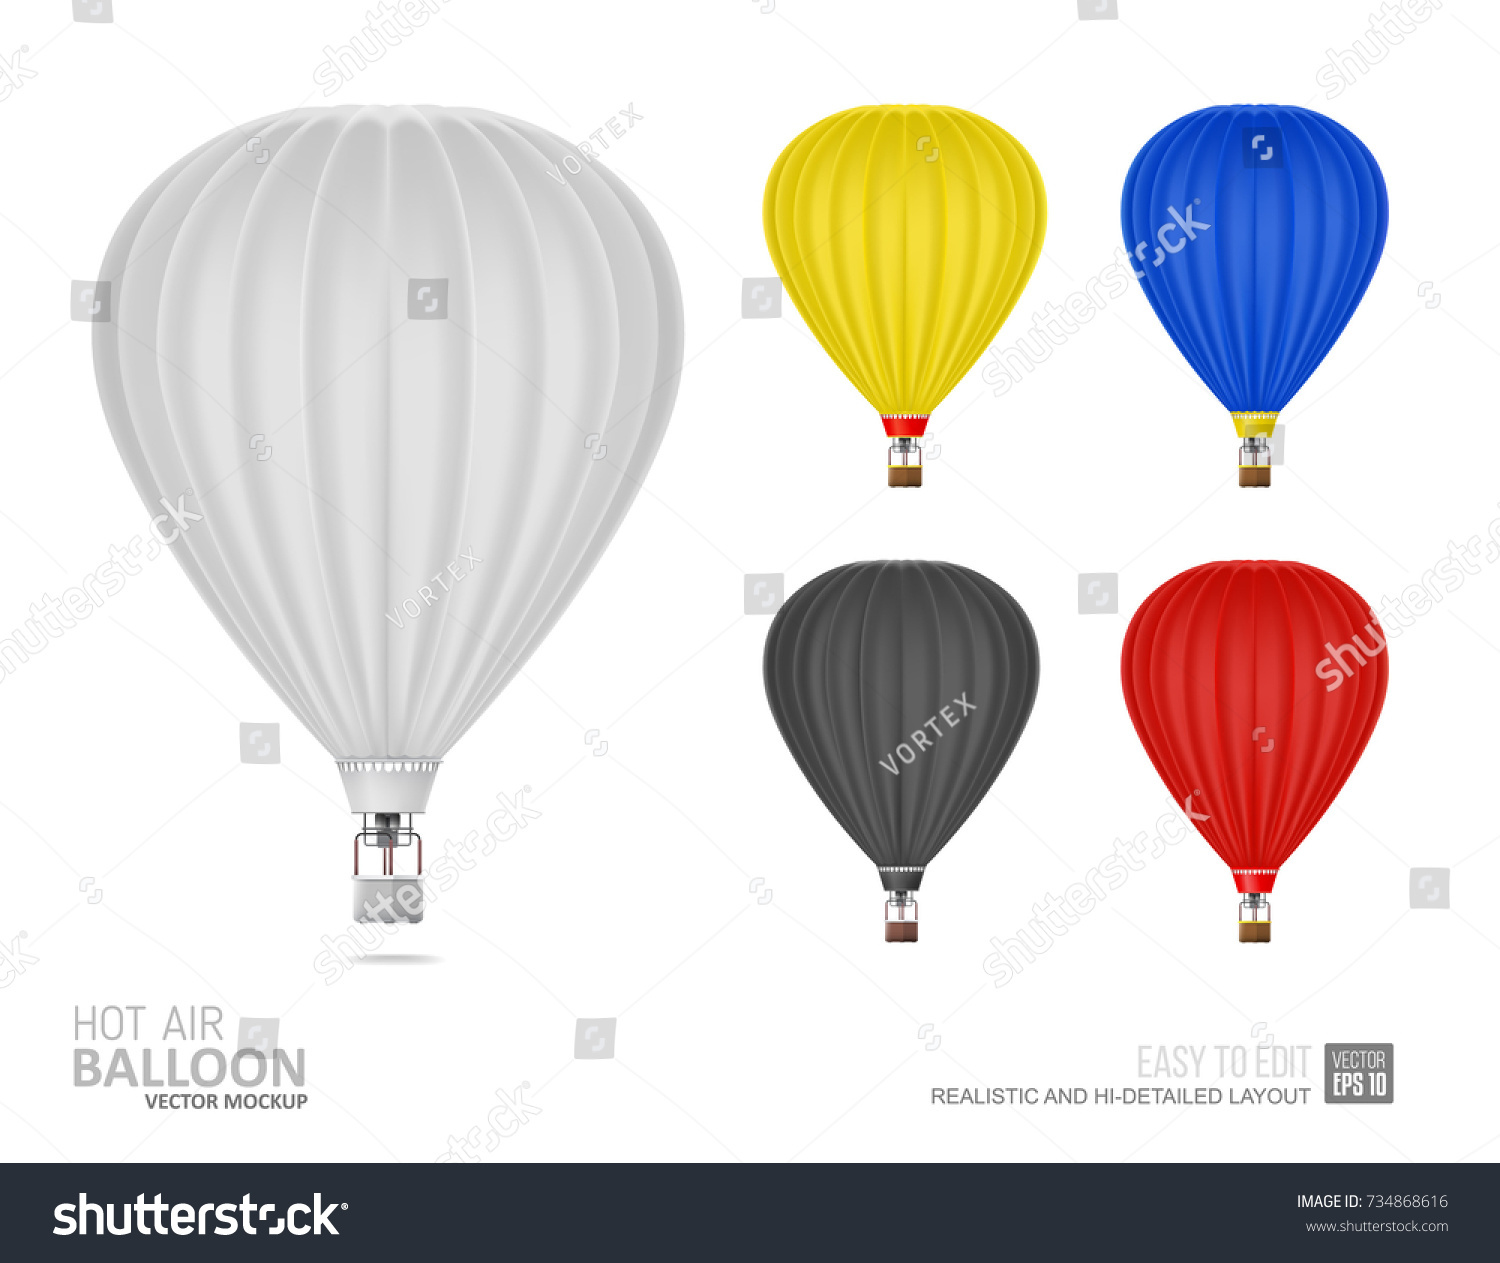 Download Hot Air Balloon White Black Color Stock Vector Royalty Free 734868616